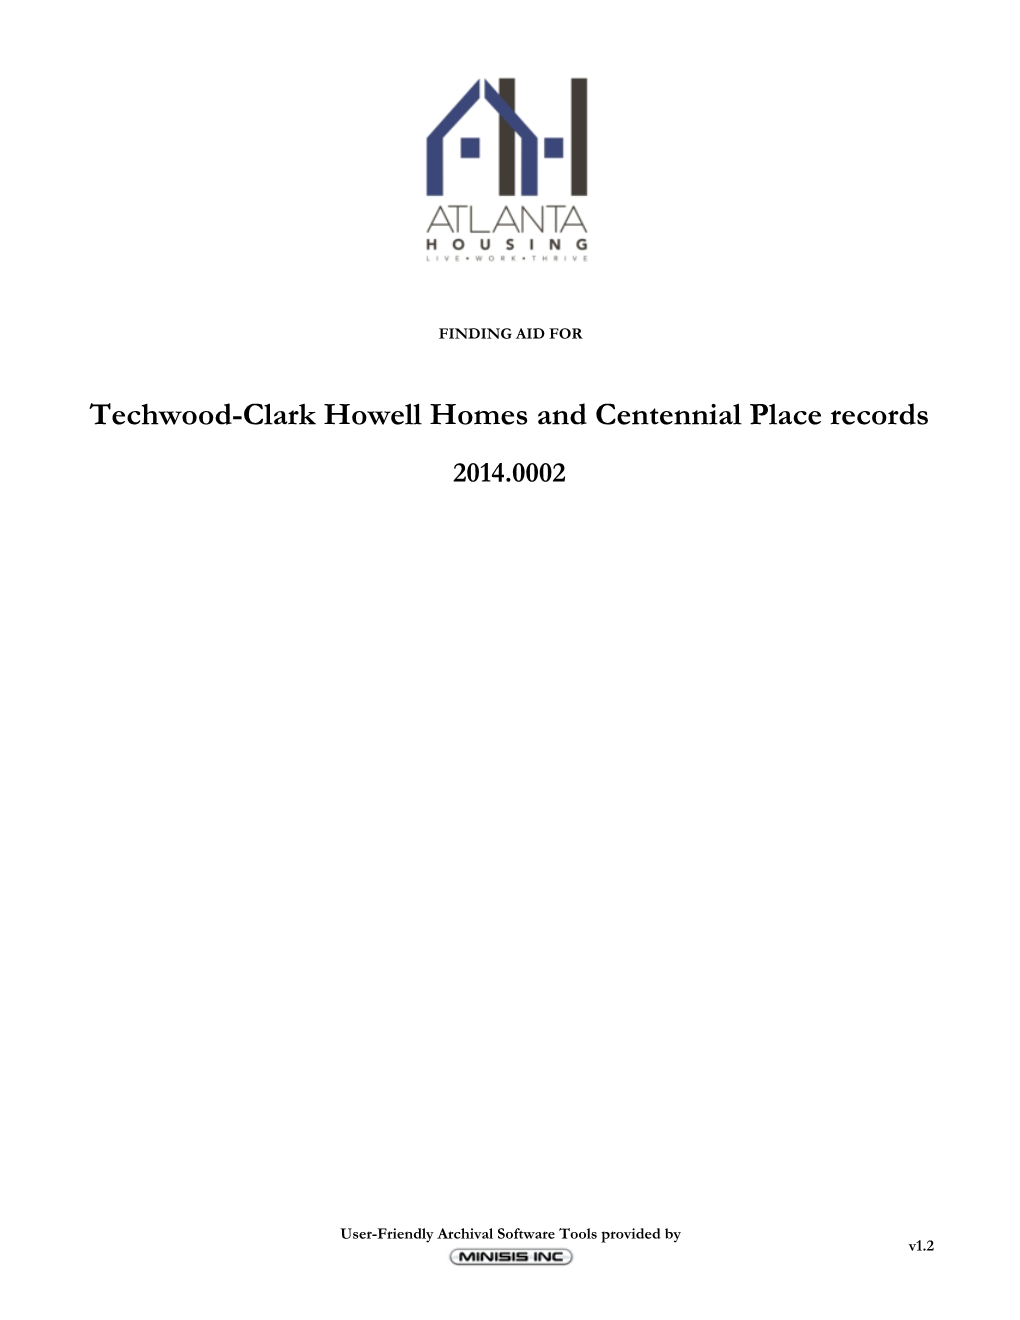 Techwood-Clark Howell Homes and Centennial Place Records 2014.0002